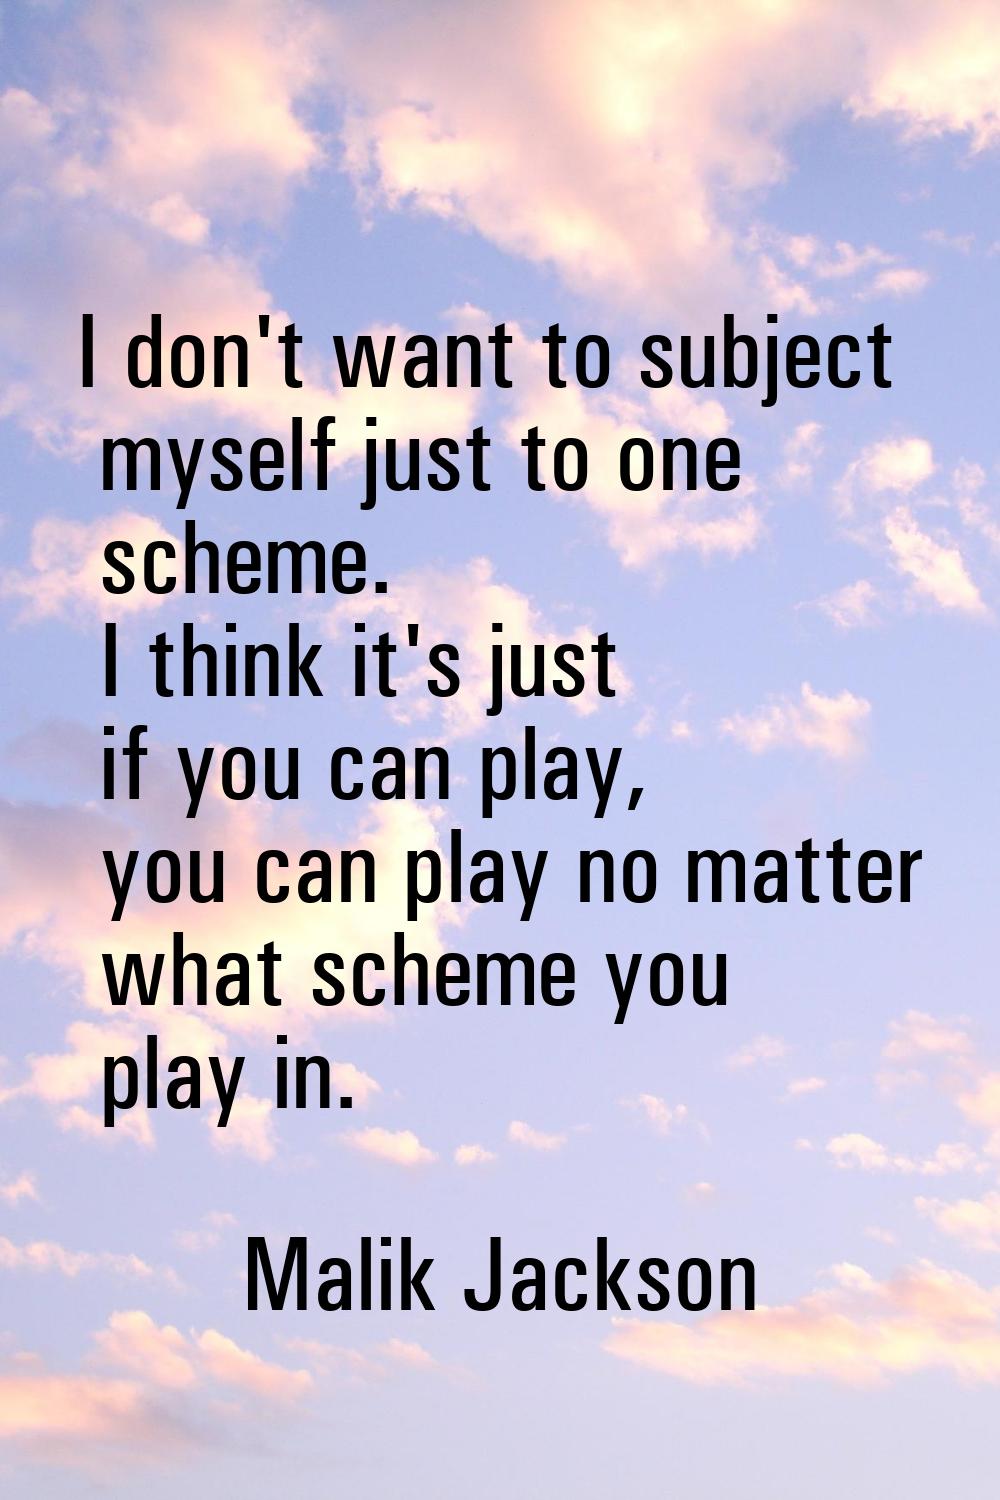 I don't want to subject myself just to one scheme. I think it's just if you can play, you can play 